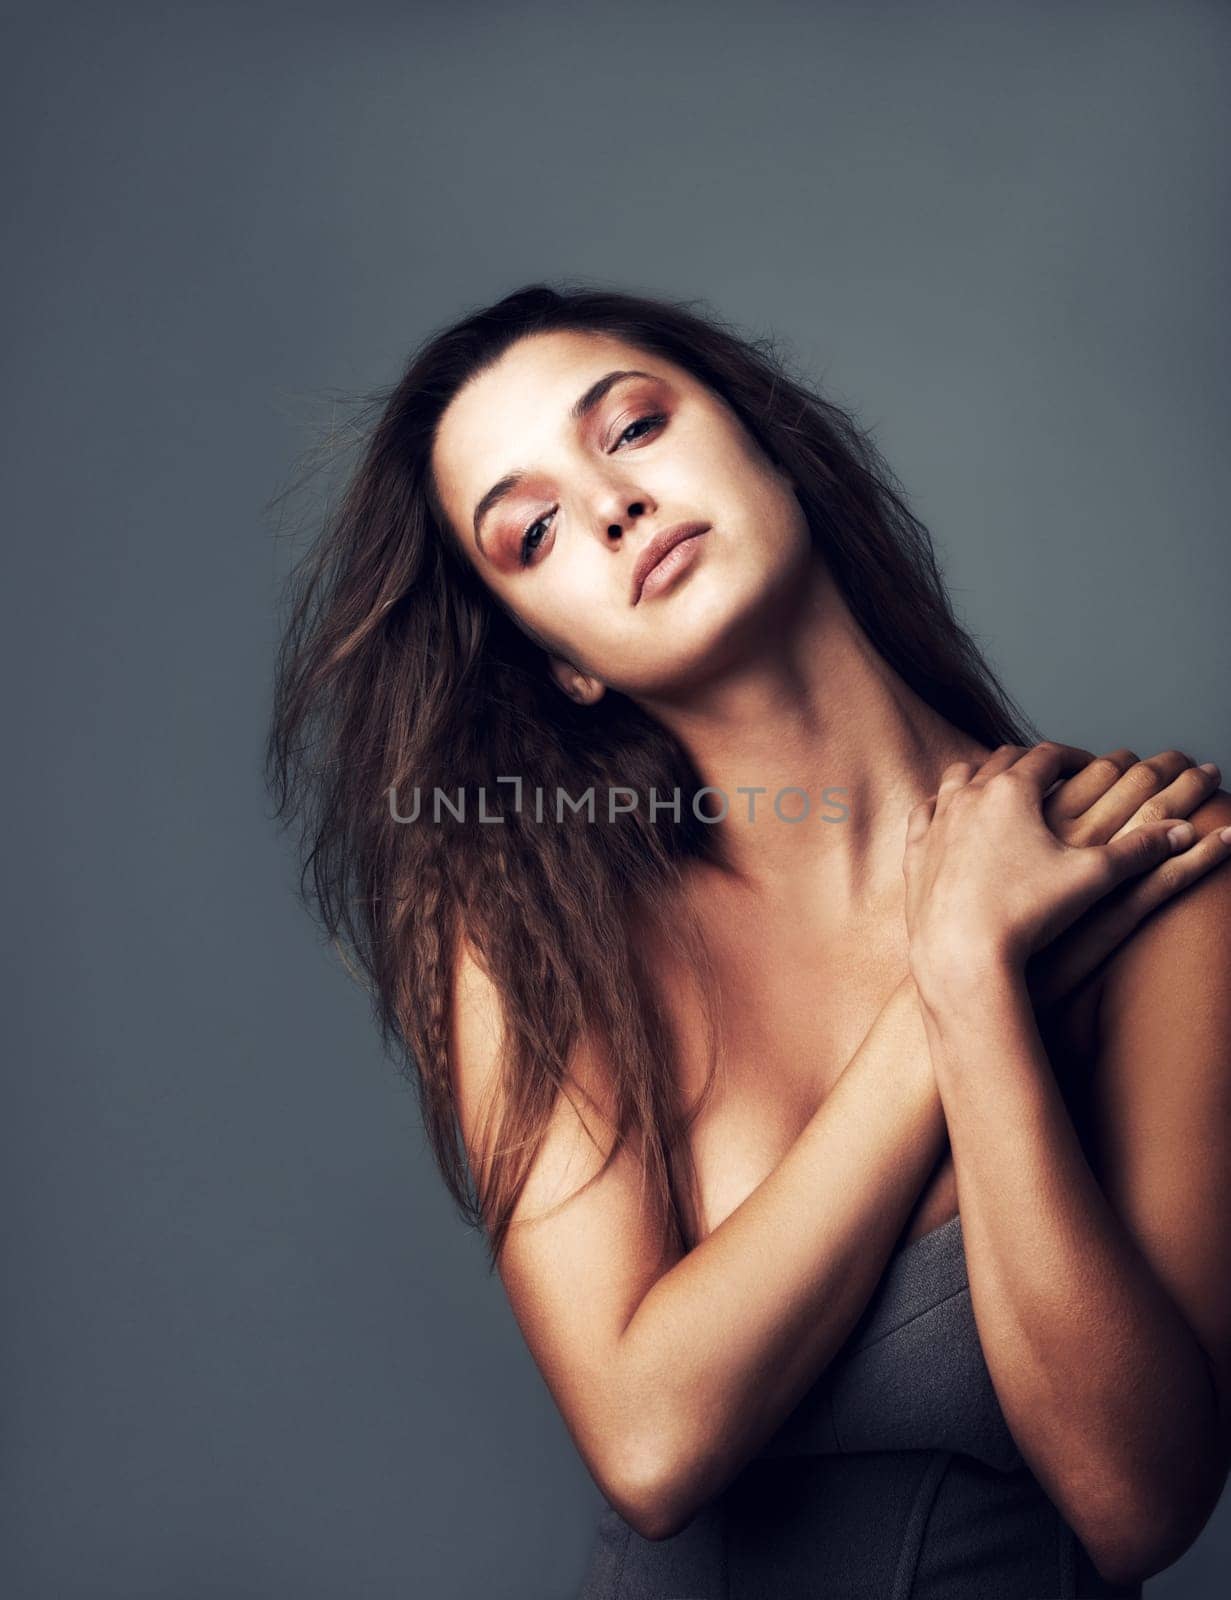 Hair, confident and portrait of woman on gray background for wellness, healthy texture and growth. Attitude, serious and face of person with hairstyle for beauty, haircare and cosmetics in studio.